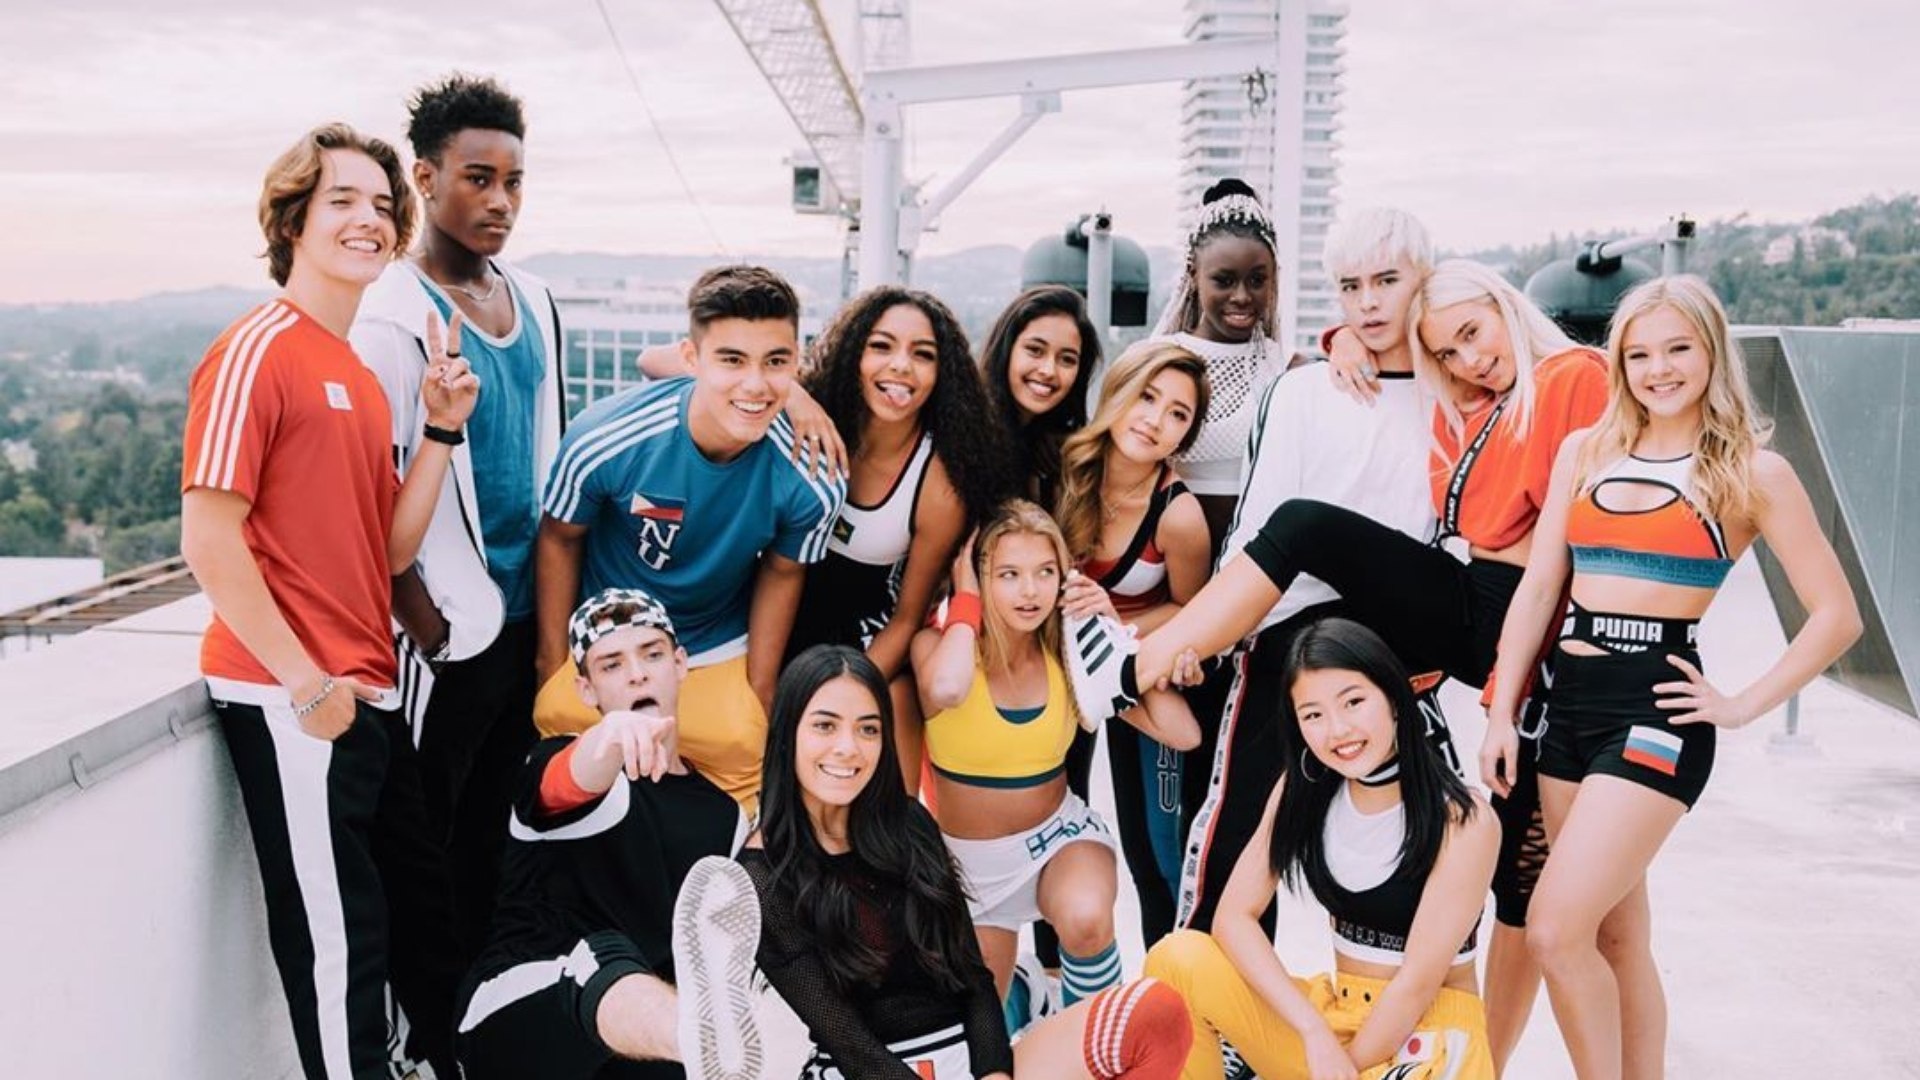 Now United (Pop group): "Dreams Come True" Tour, Photoshoot in Brazil, 2019. 1920x1080 Full HD Wallpaper.